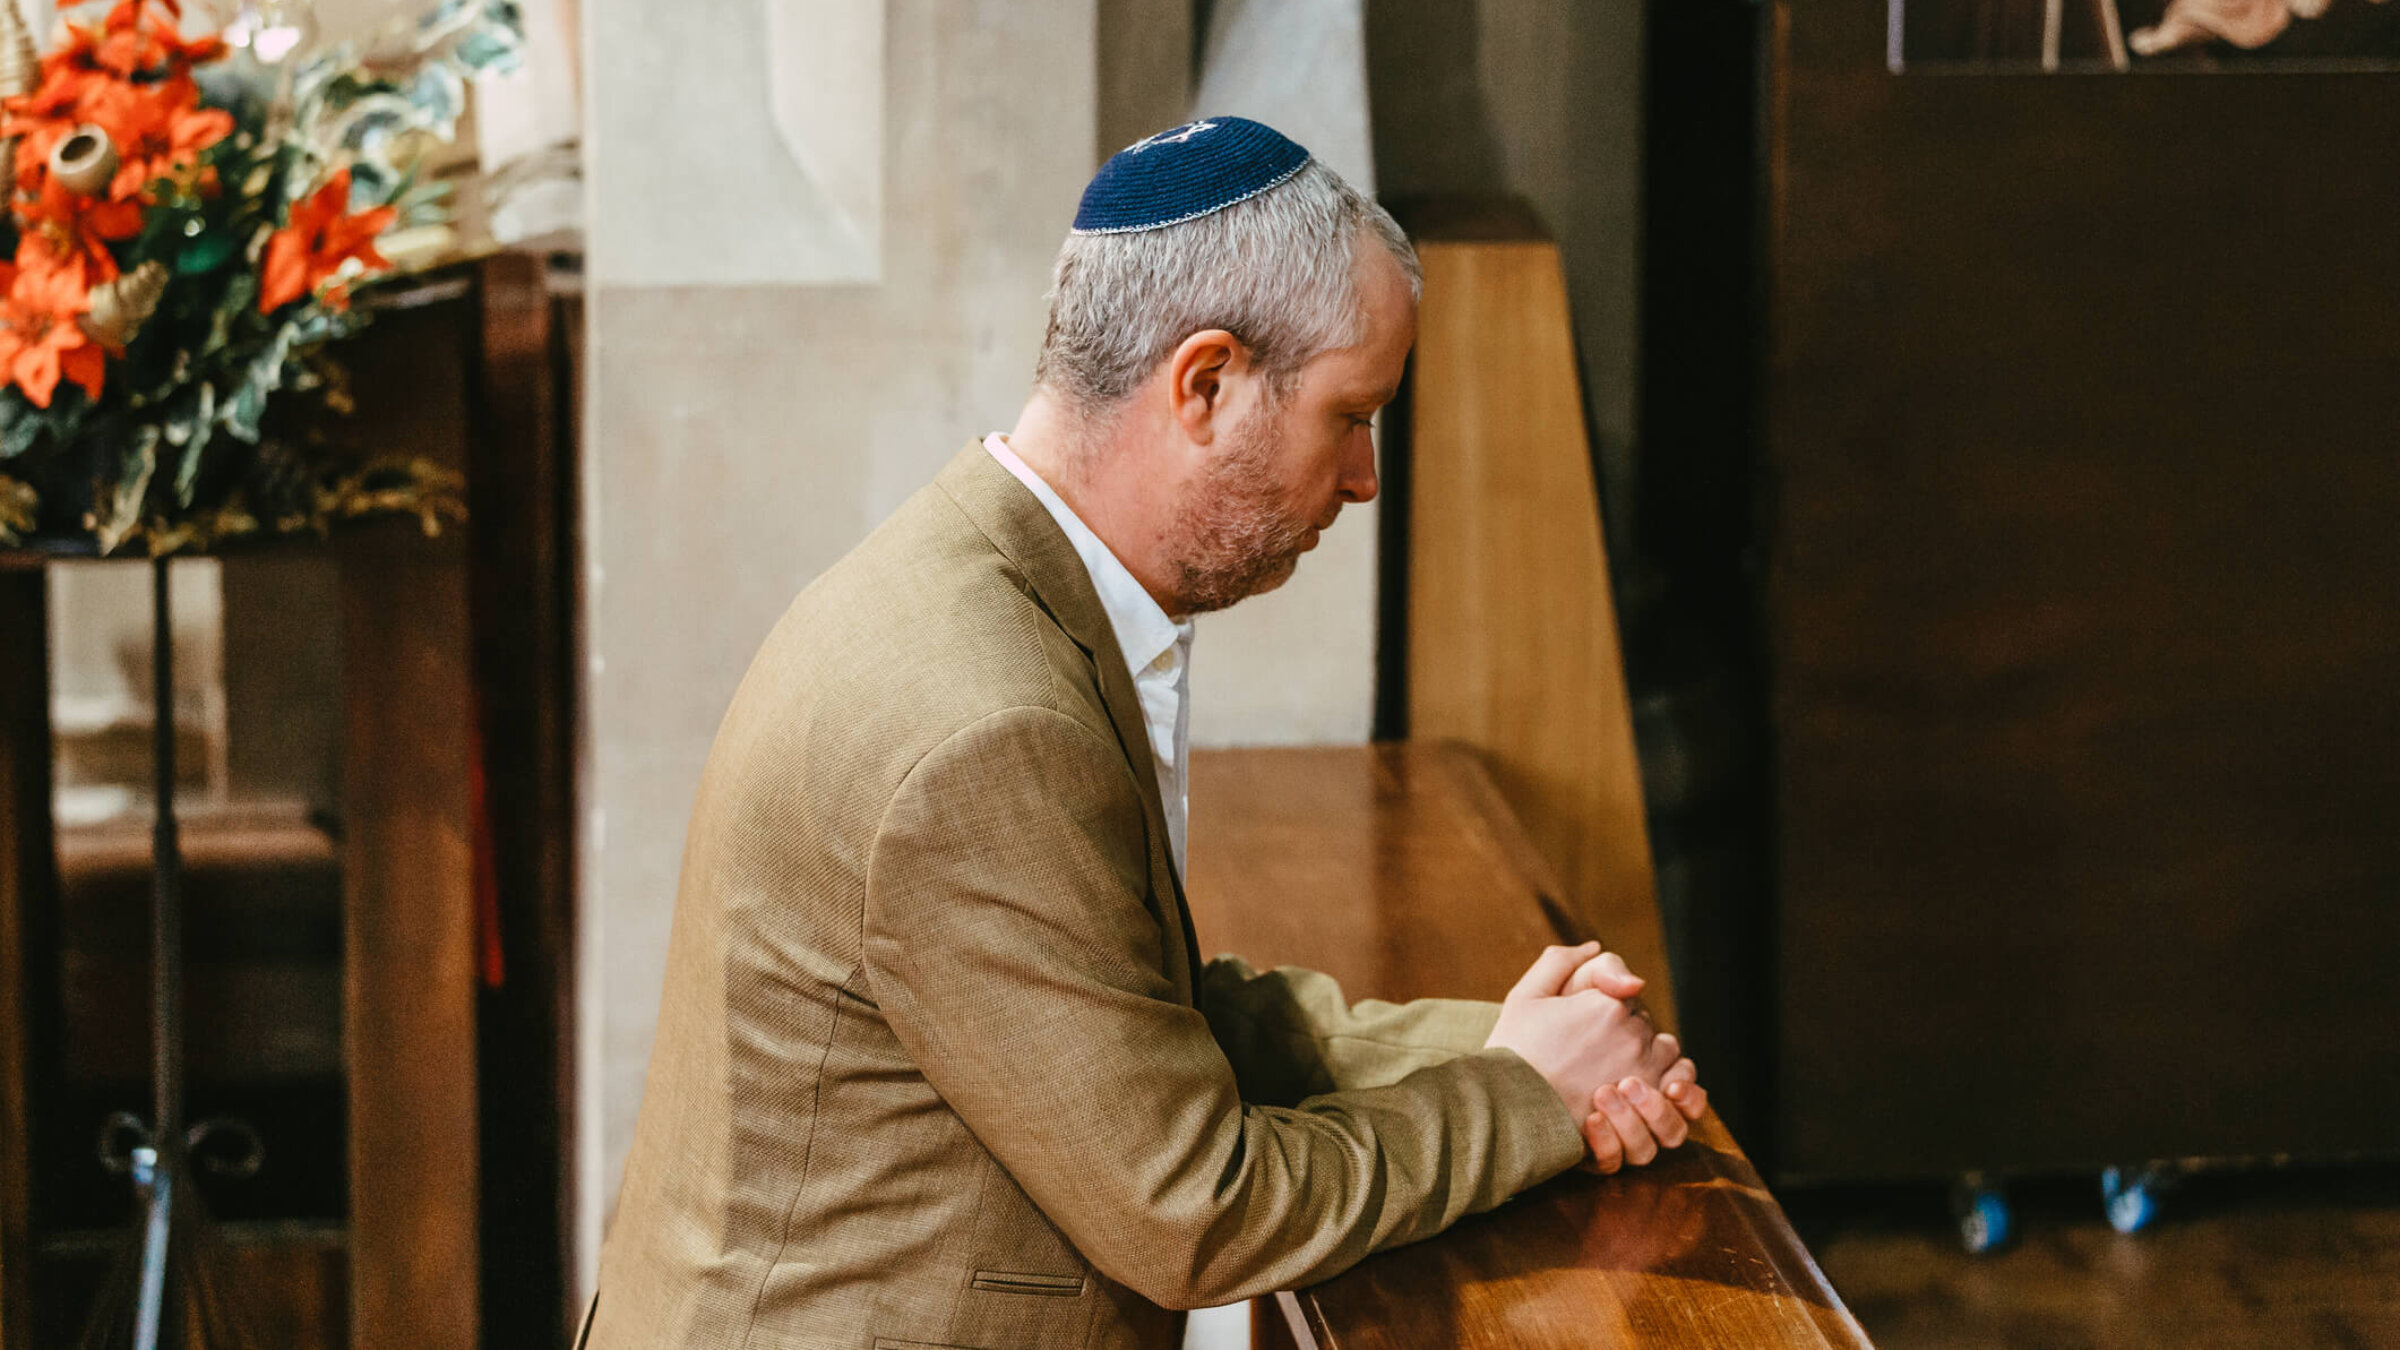 Portrait of a Jewish man kneeling and praying in the synagogue. The man is wearing a yarmulke on his head as he sits alone in the synagogue.